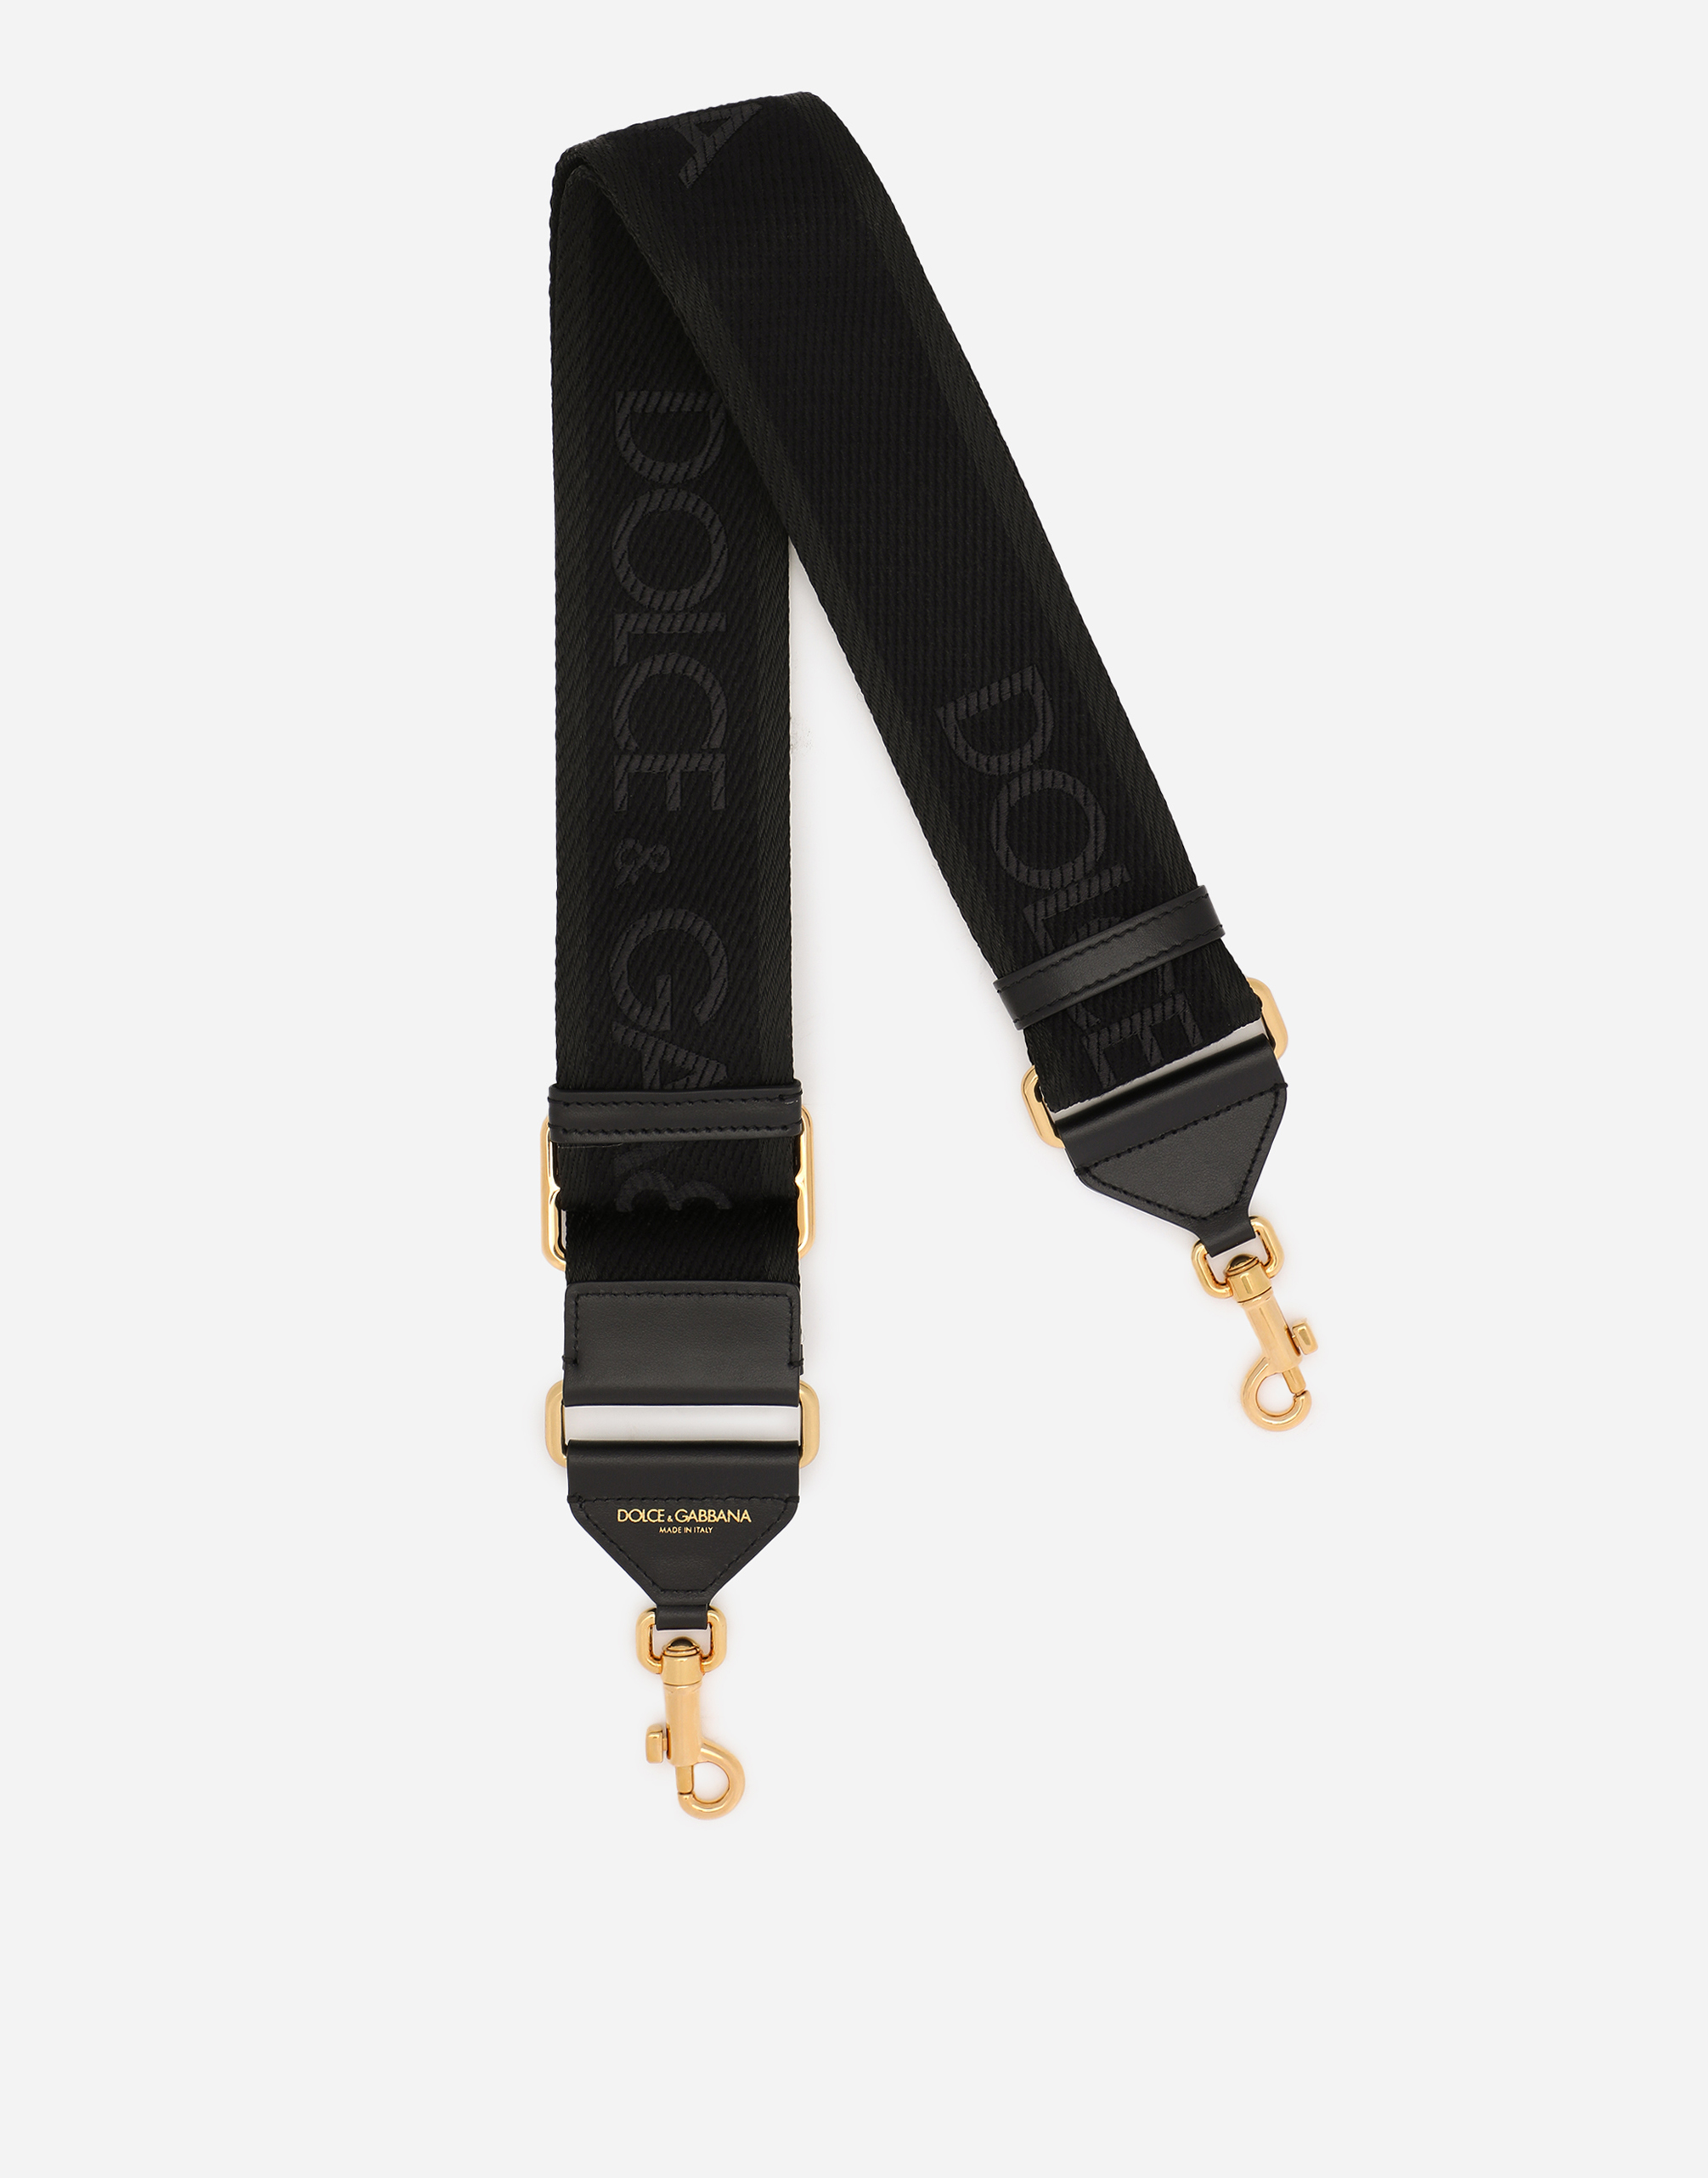 Branded fabric and leather strap in Black